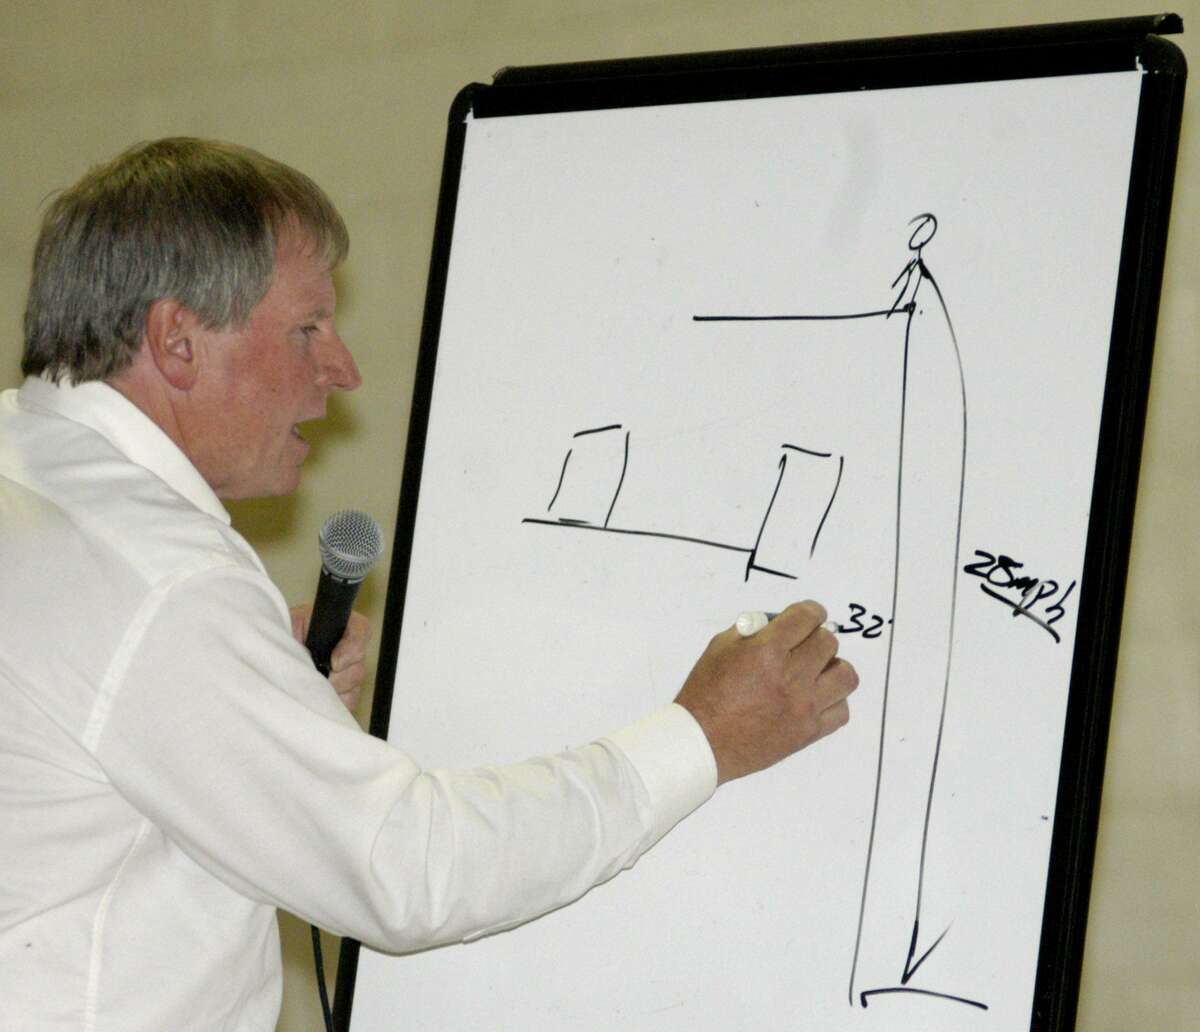 Survive the Drive founder and riving instructor Bob Green offers a telling sketch to bring home a point about the impact of auto collisions during "Survive The Drive," held in Sherman in 2012. Green announced this week that his nonprofit organization is closing down.